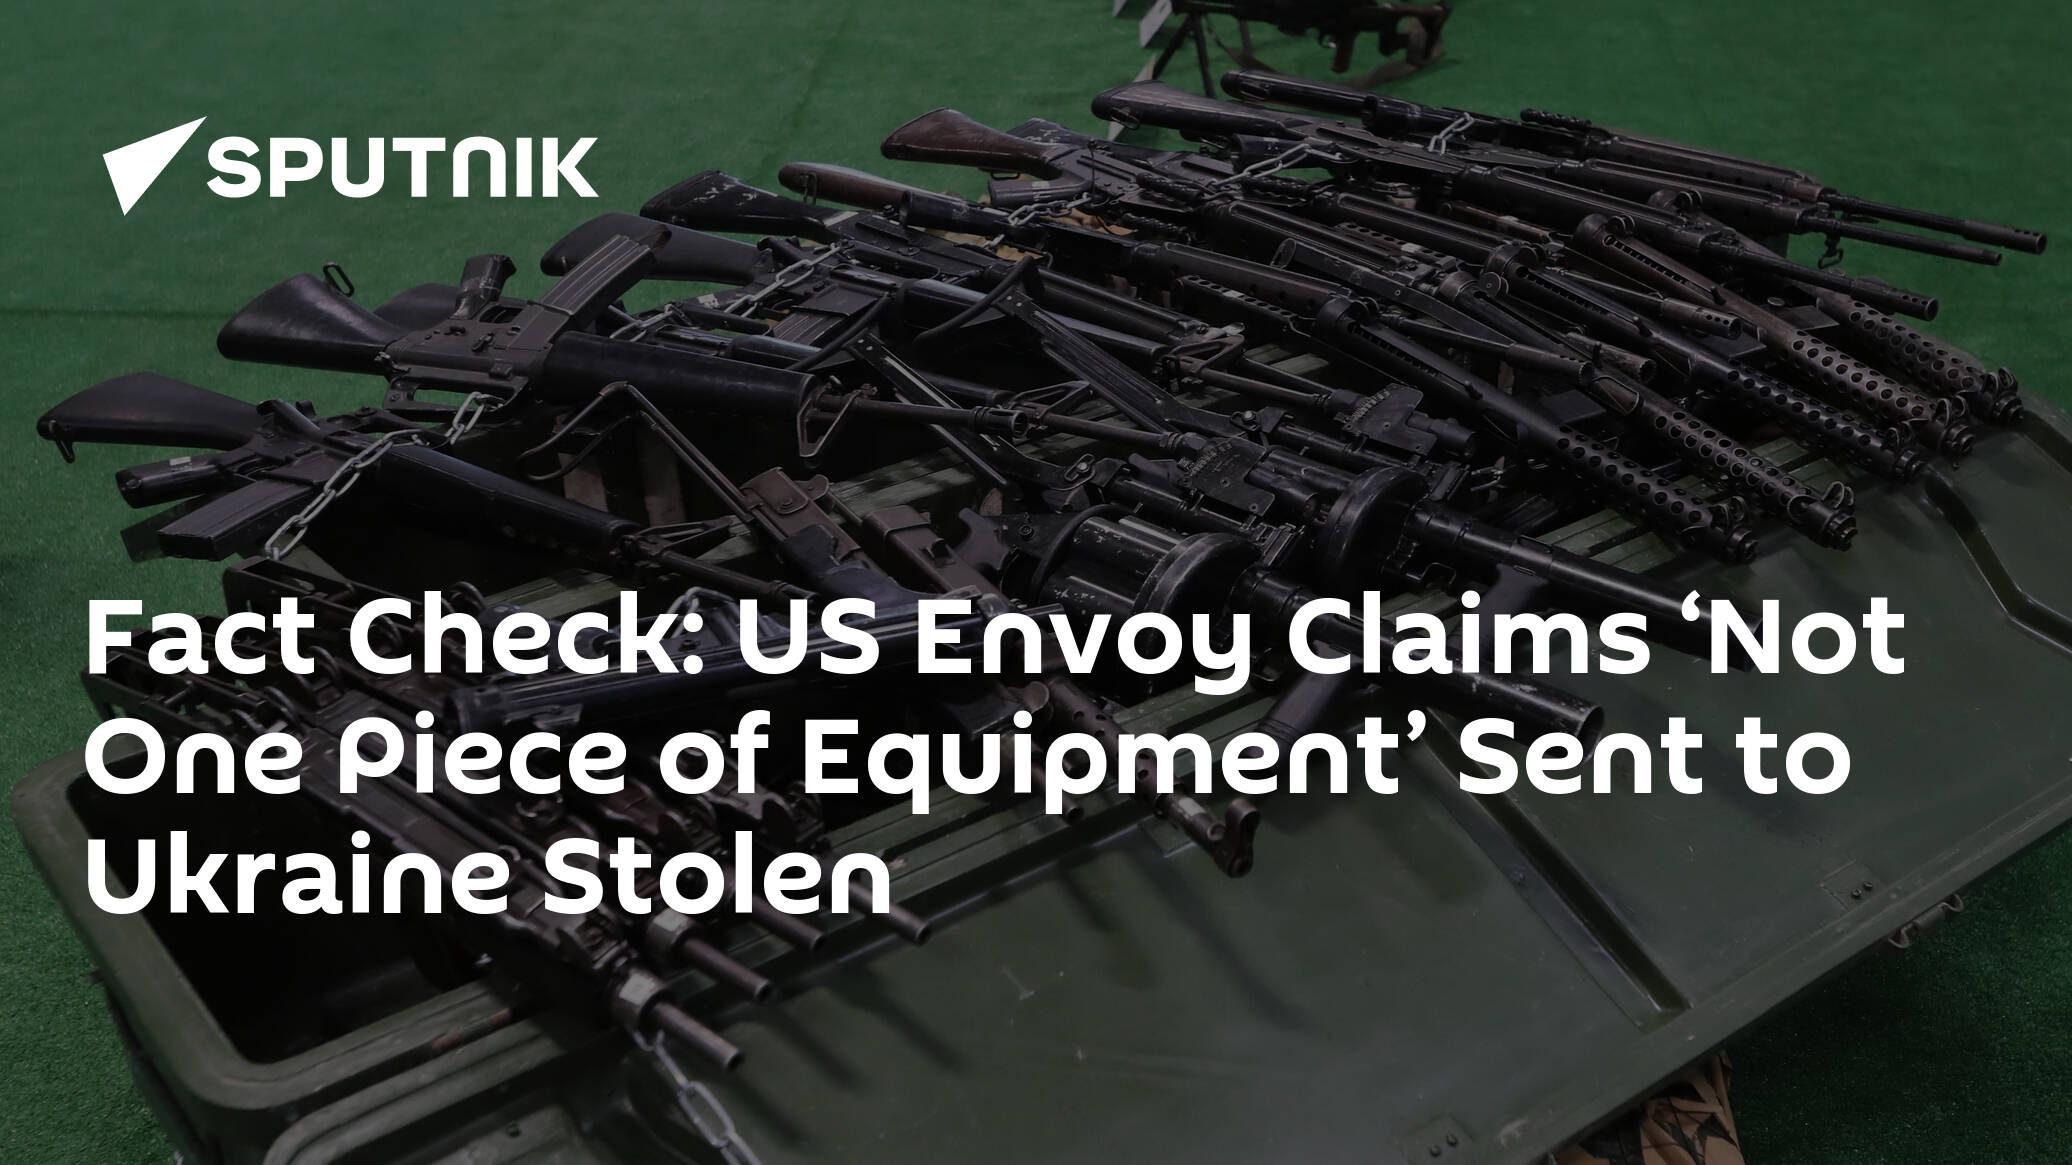 Fact-Check: US Envoy Claims ‘Not One Piece of Equipment’ Sent to Ukraine Stolen